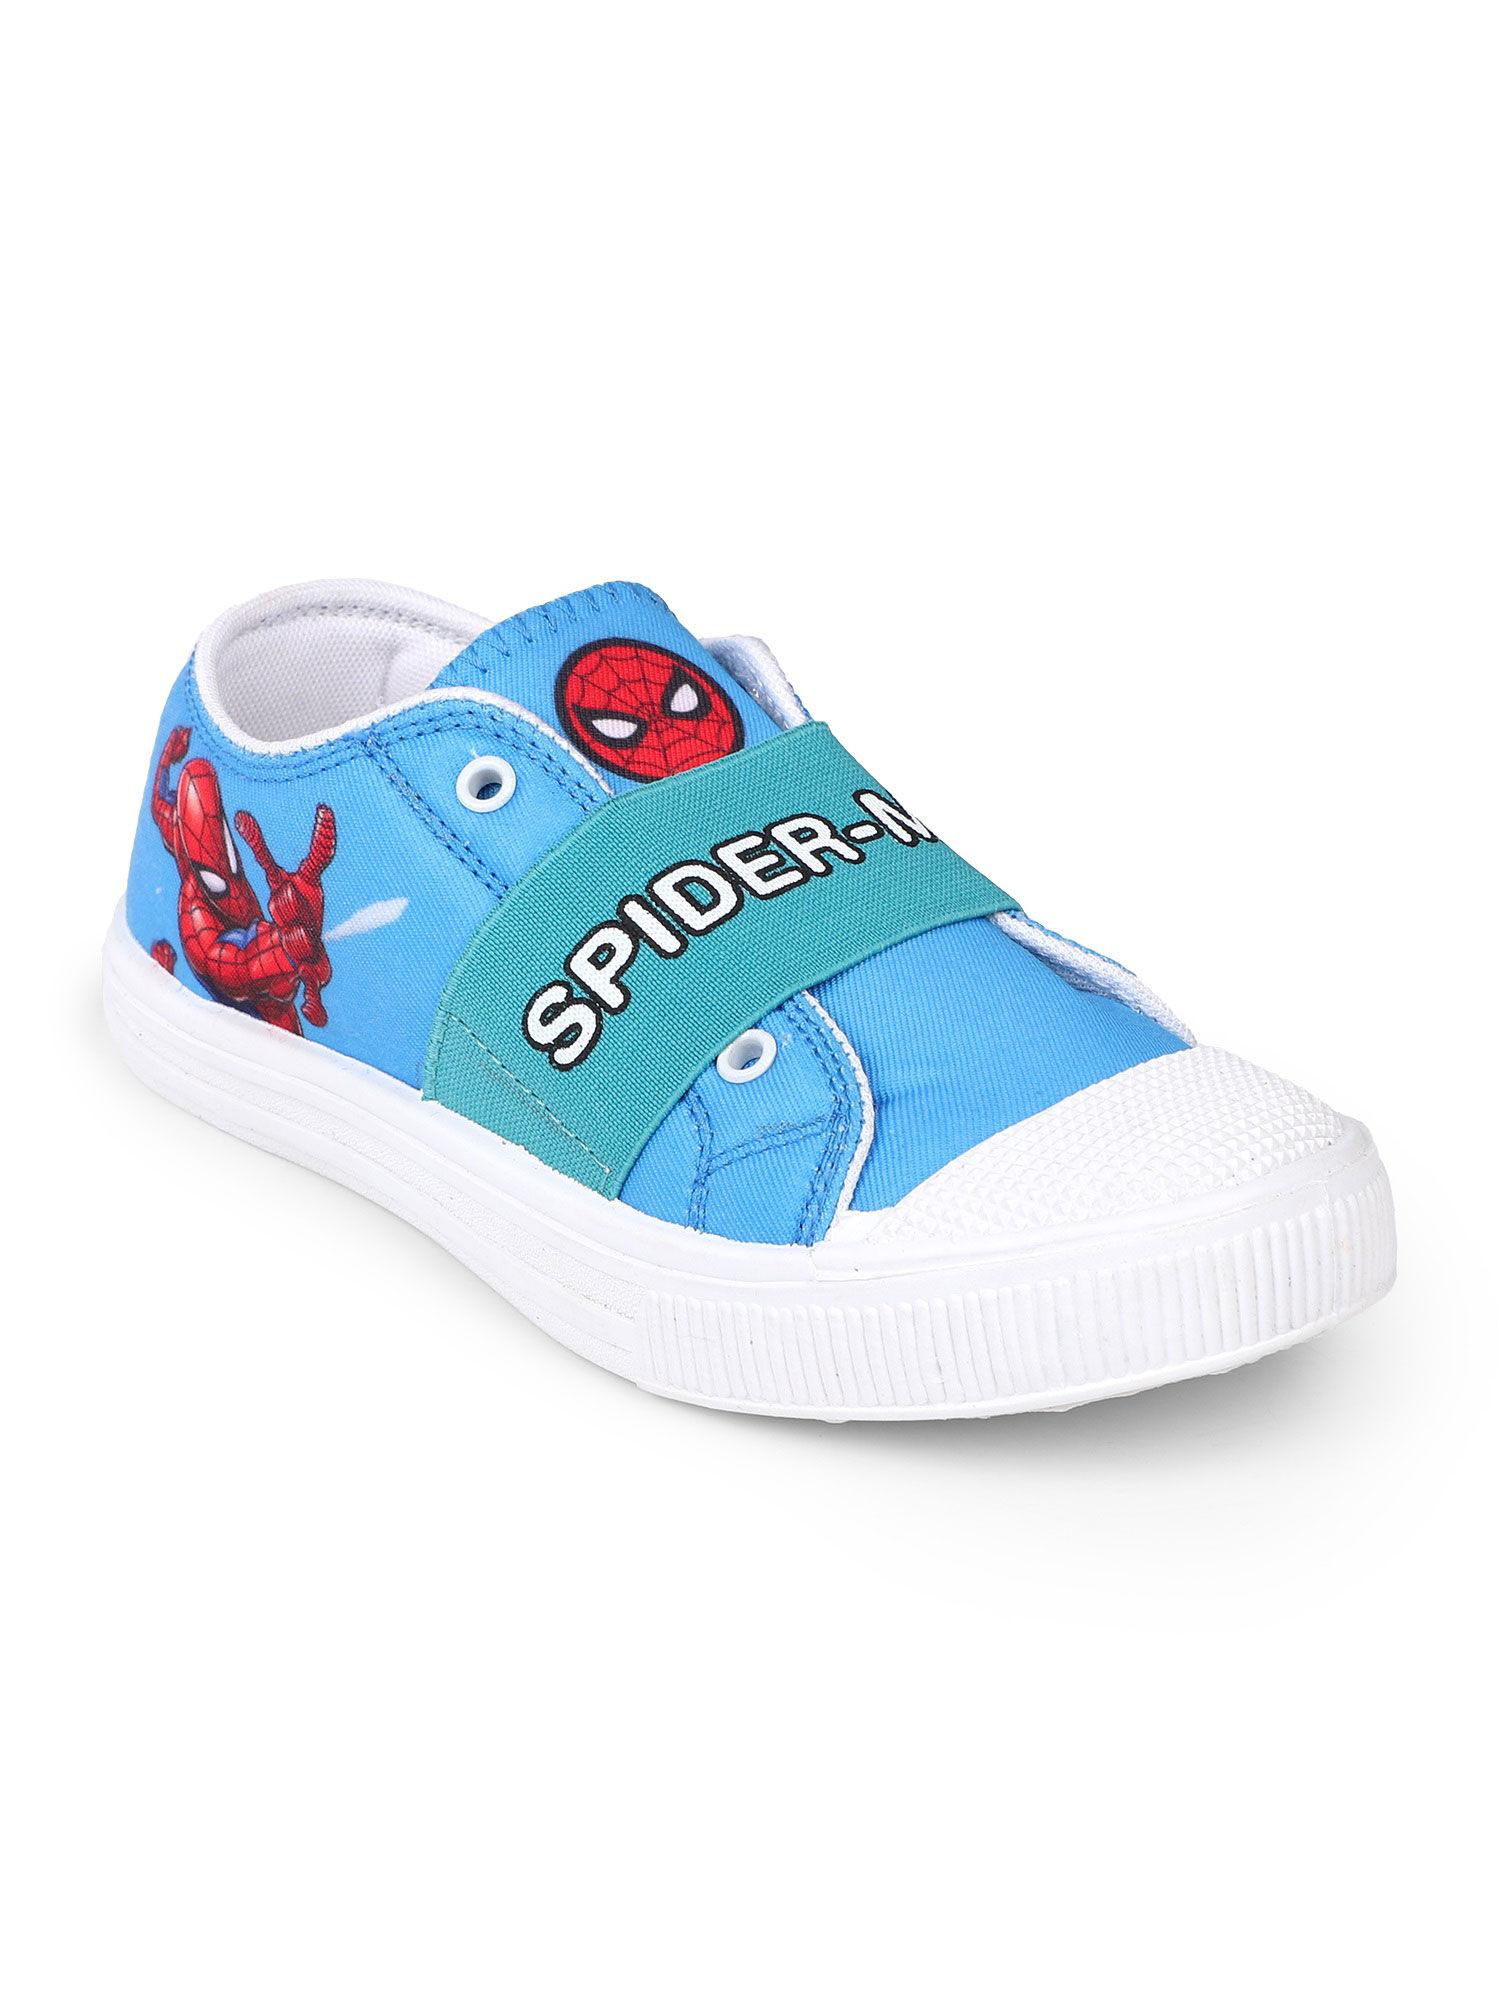 blue color spiderman printed shoes for boys